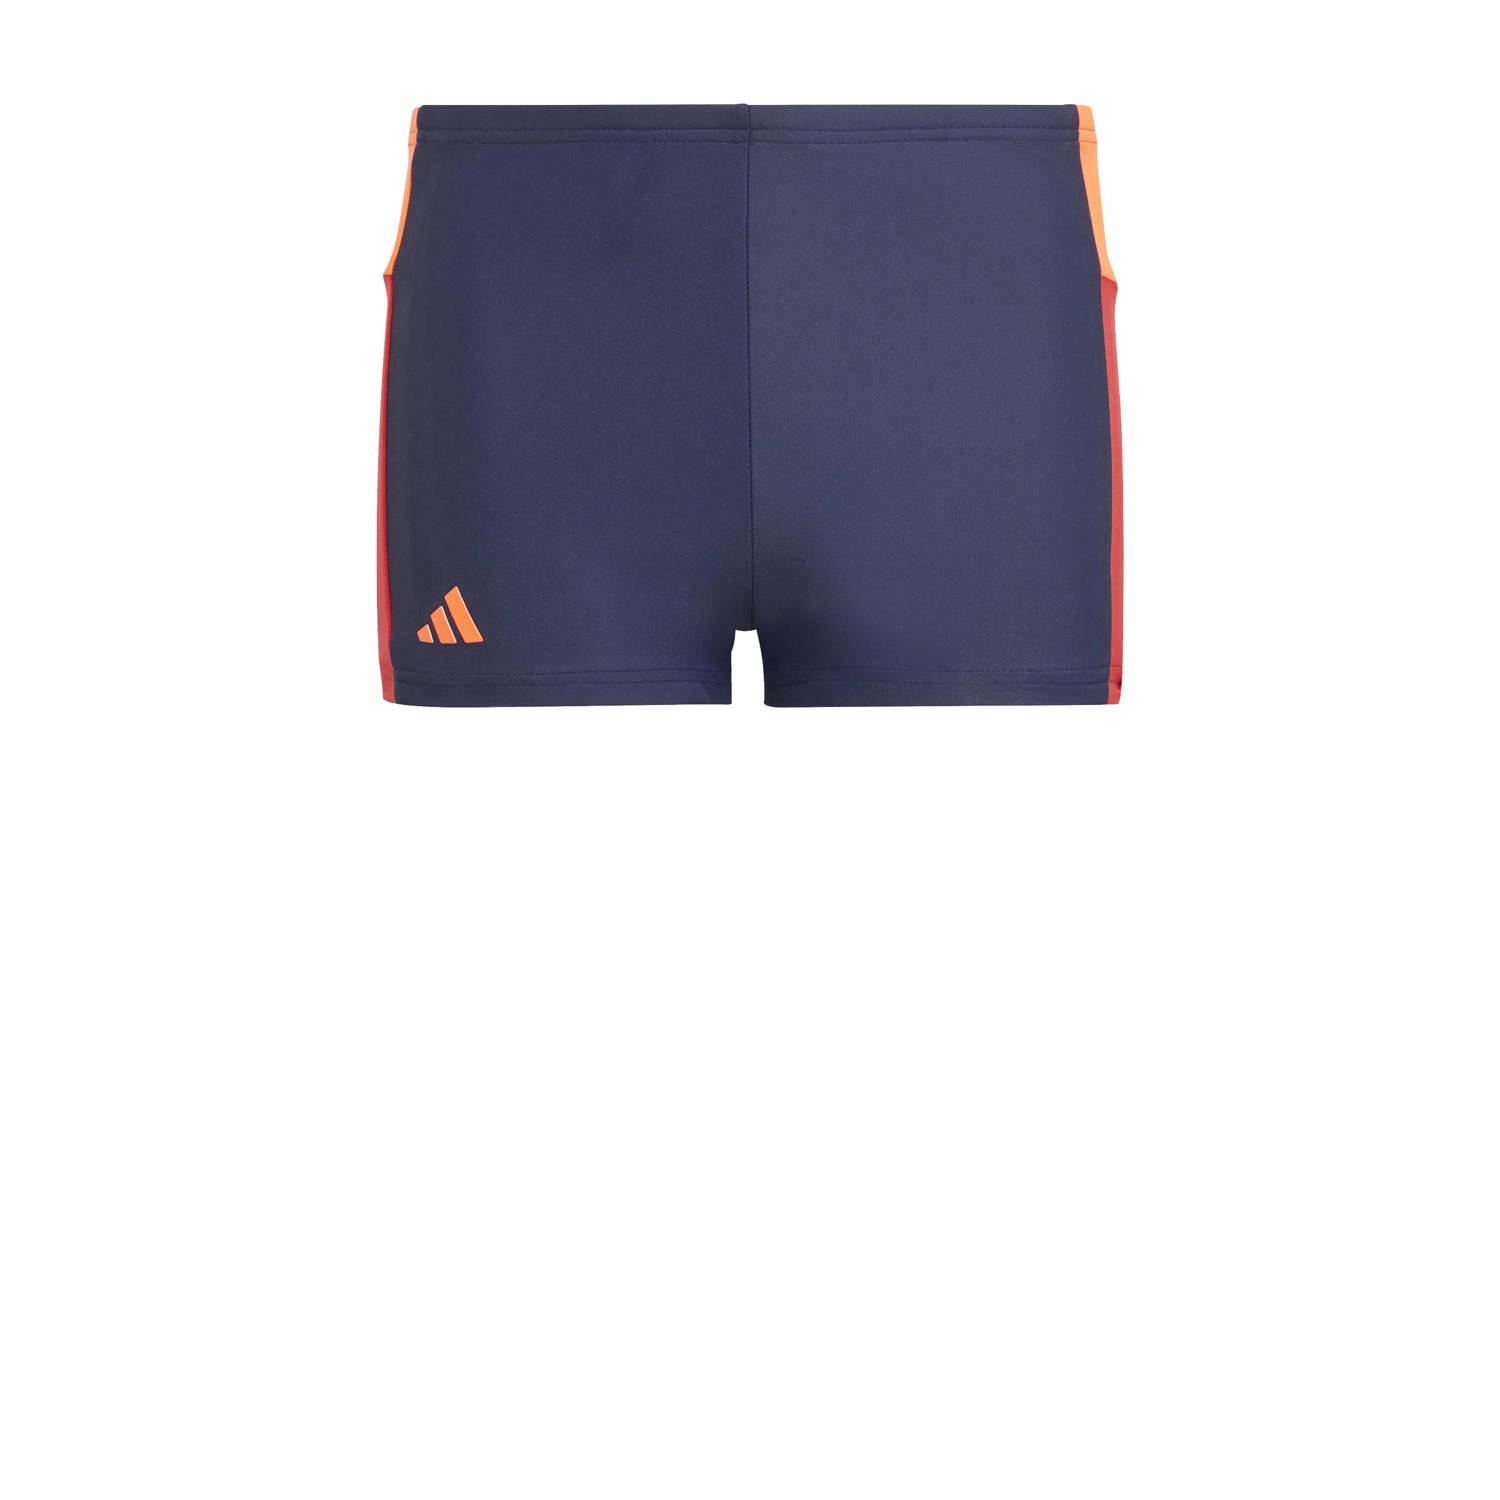 Adidas Perfor ce zwemboxer donkerblauw rood Gerecycled polyamide 128